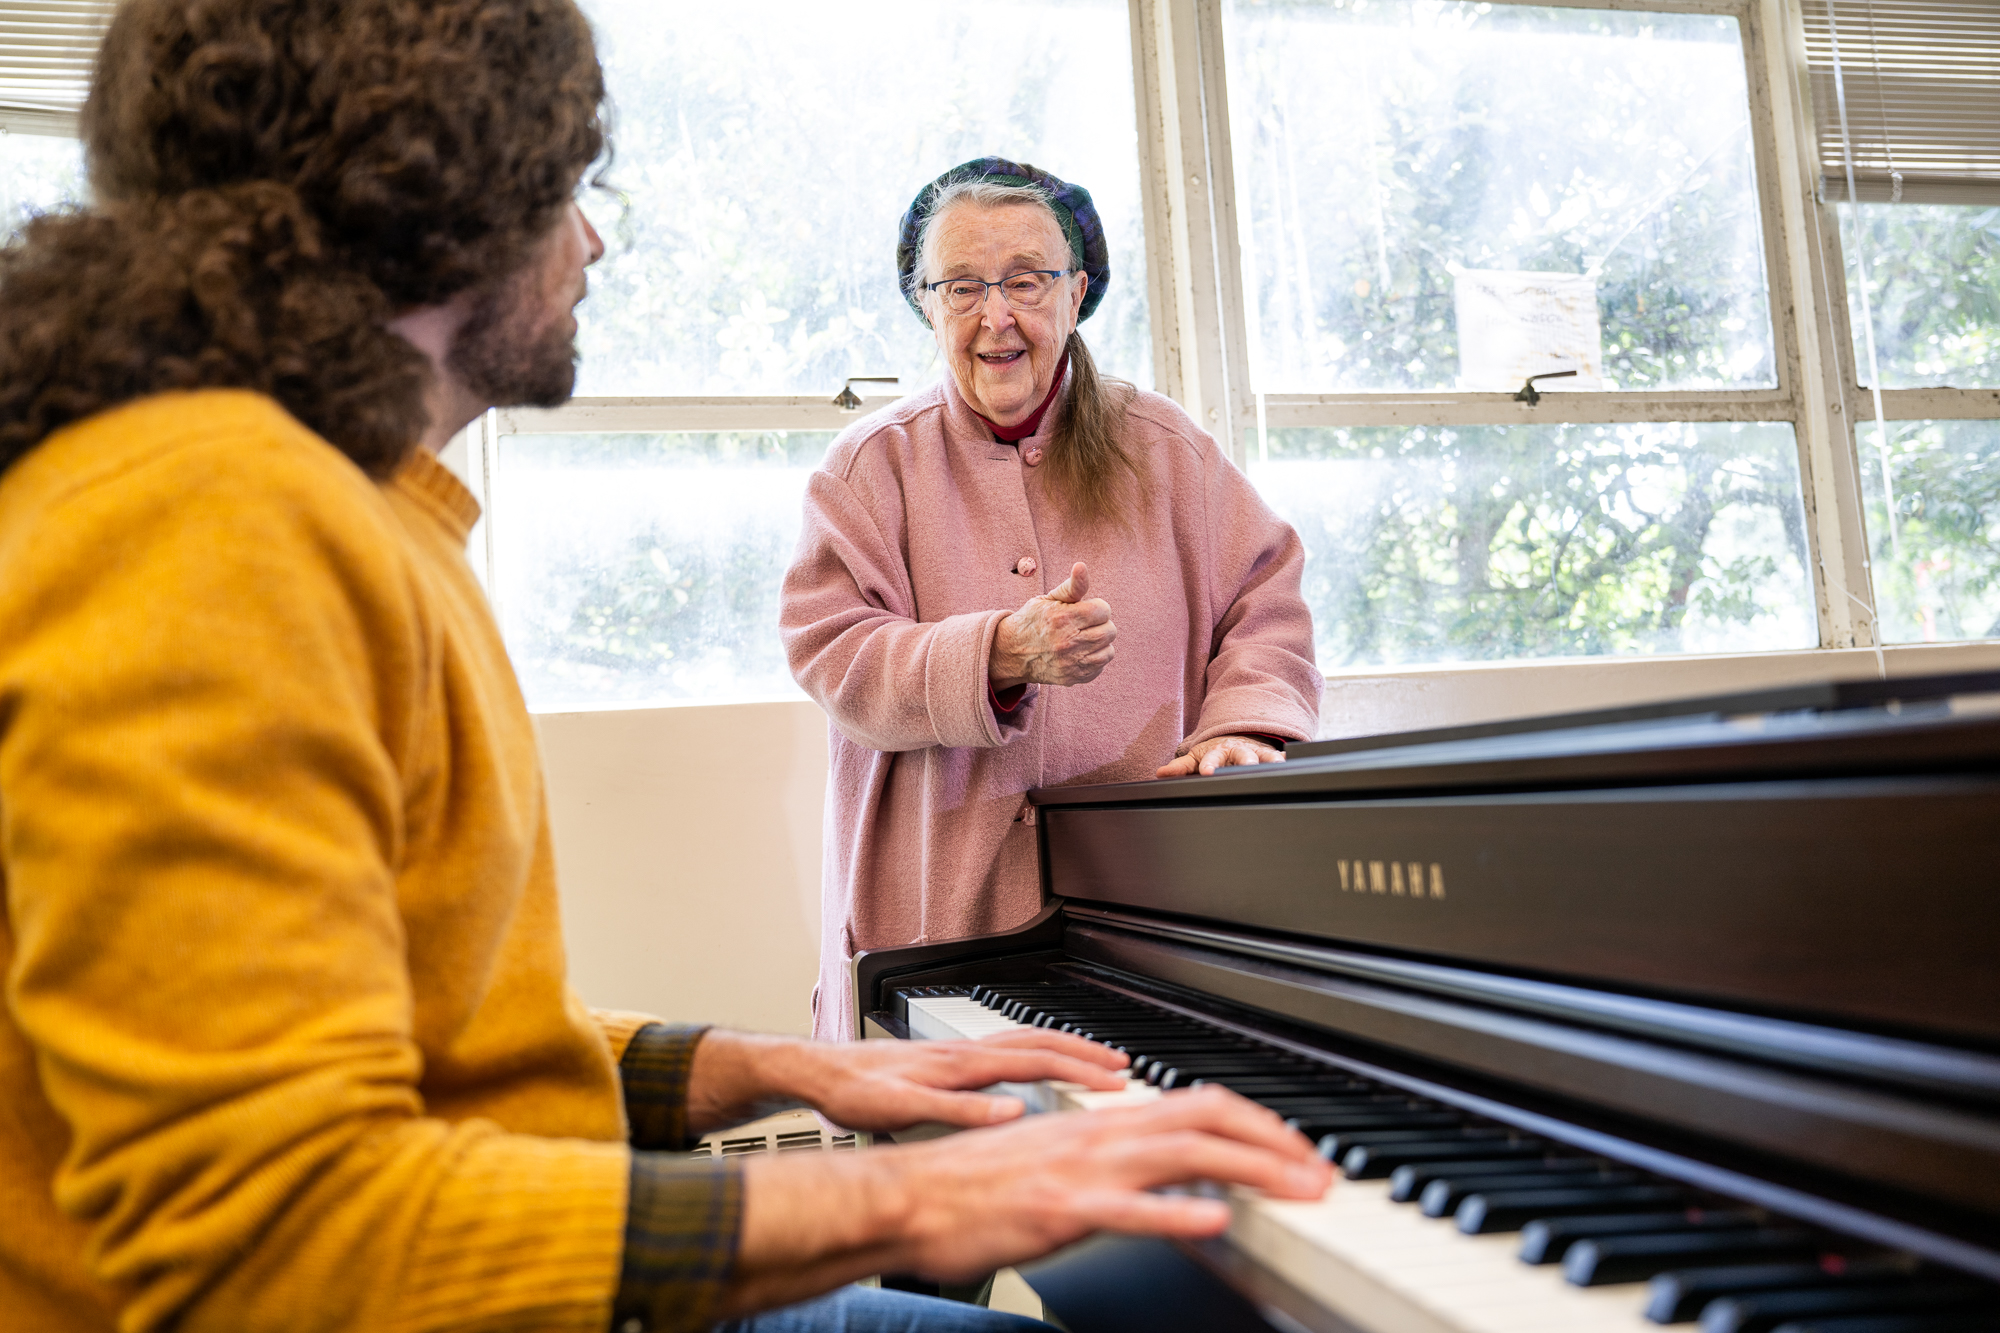 An older woman wearing glasses and a pink coat speaks to a younger student as he plays a grand piano